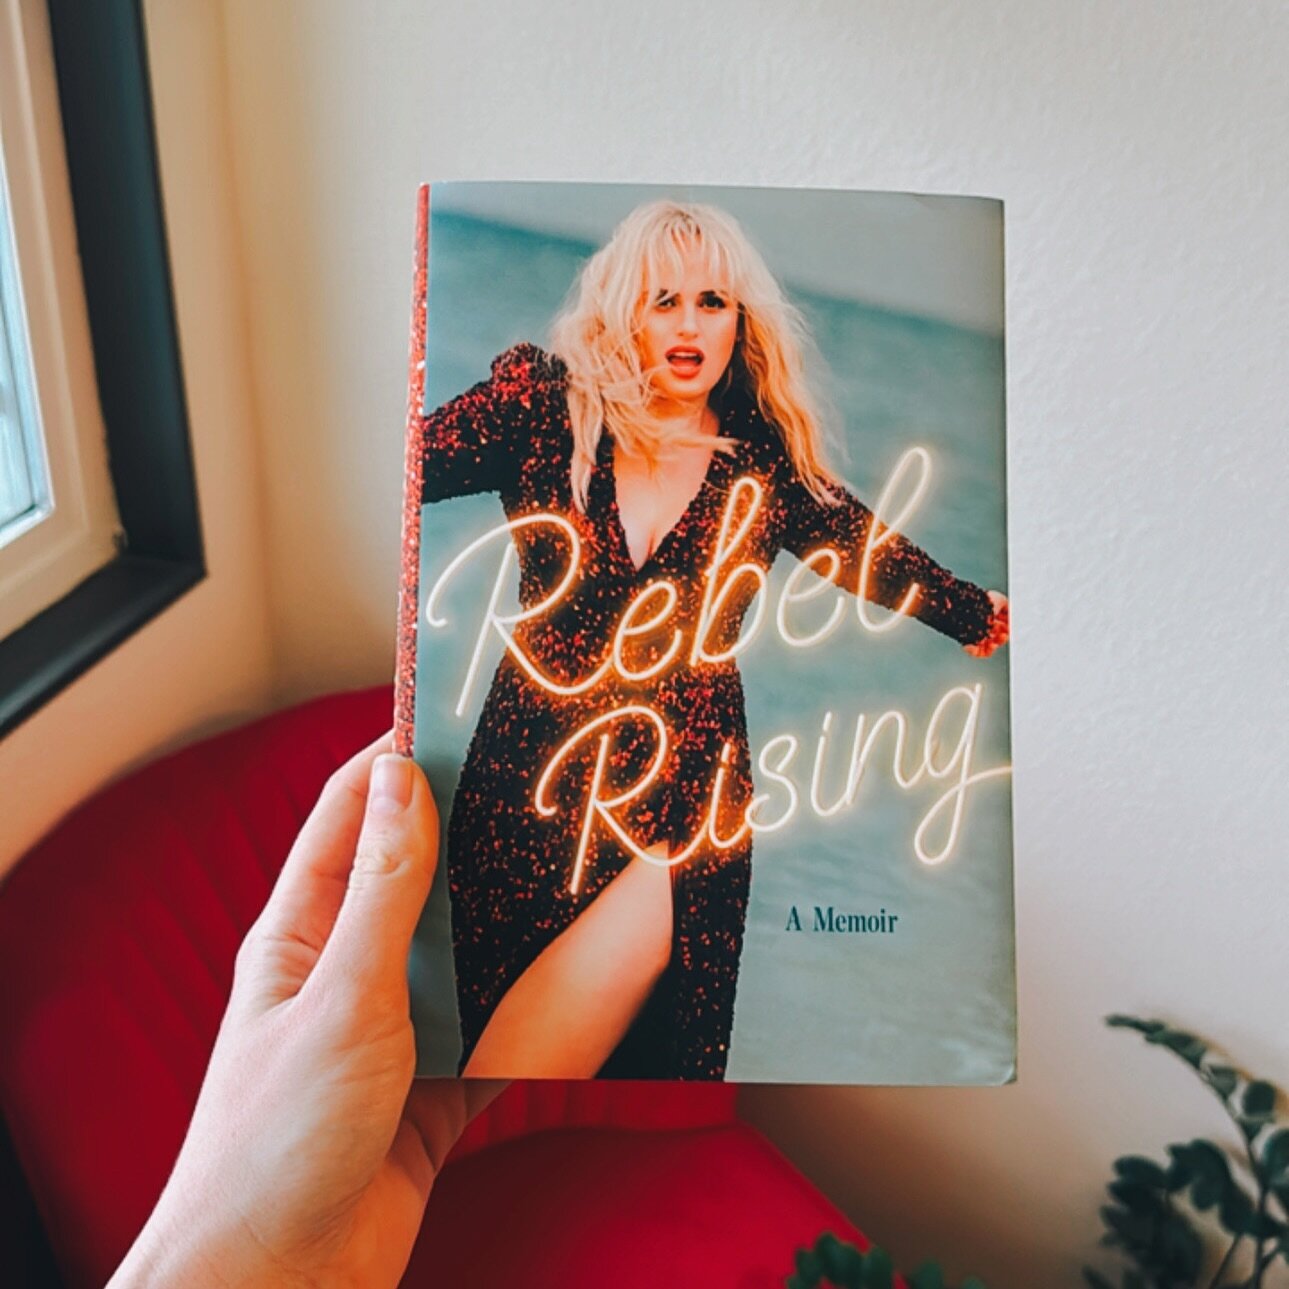 In a mood for memoirs! 
This bad boy came out this week and I can&rsquo;t wait to dig into it. Is it on your TBR? 👀🔥

@rebelwilson @simonandschuster